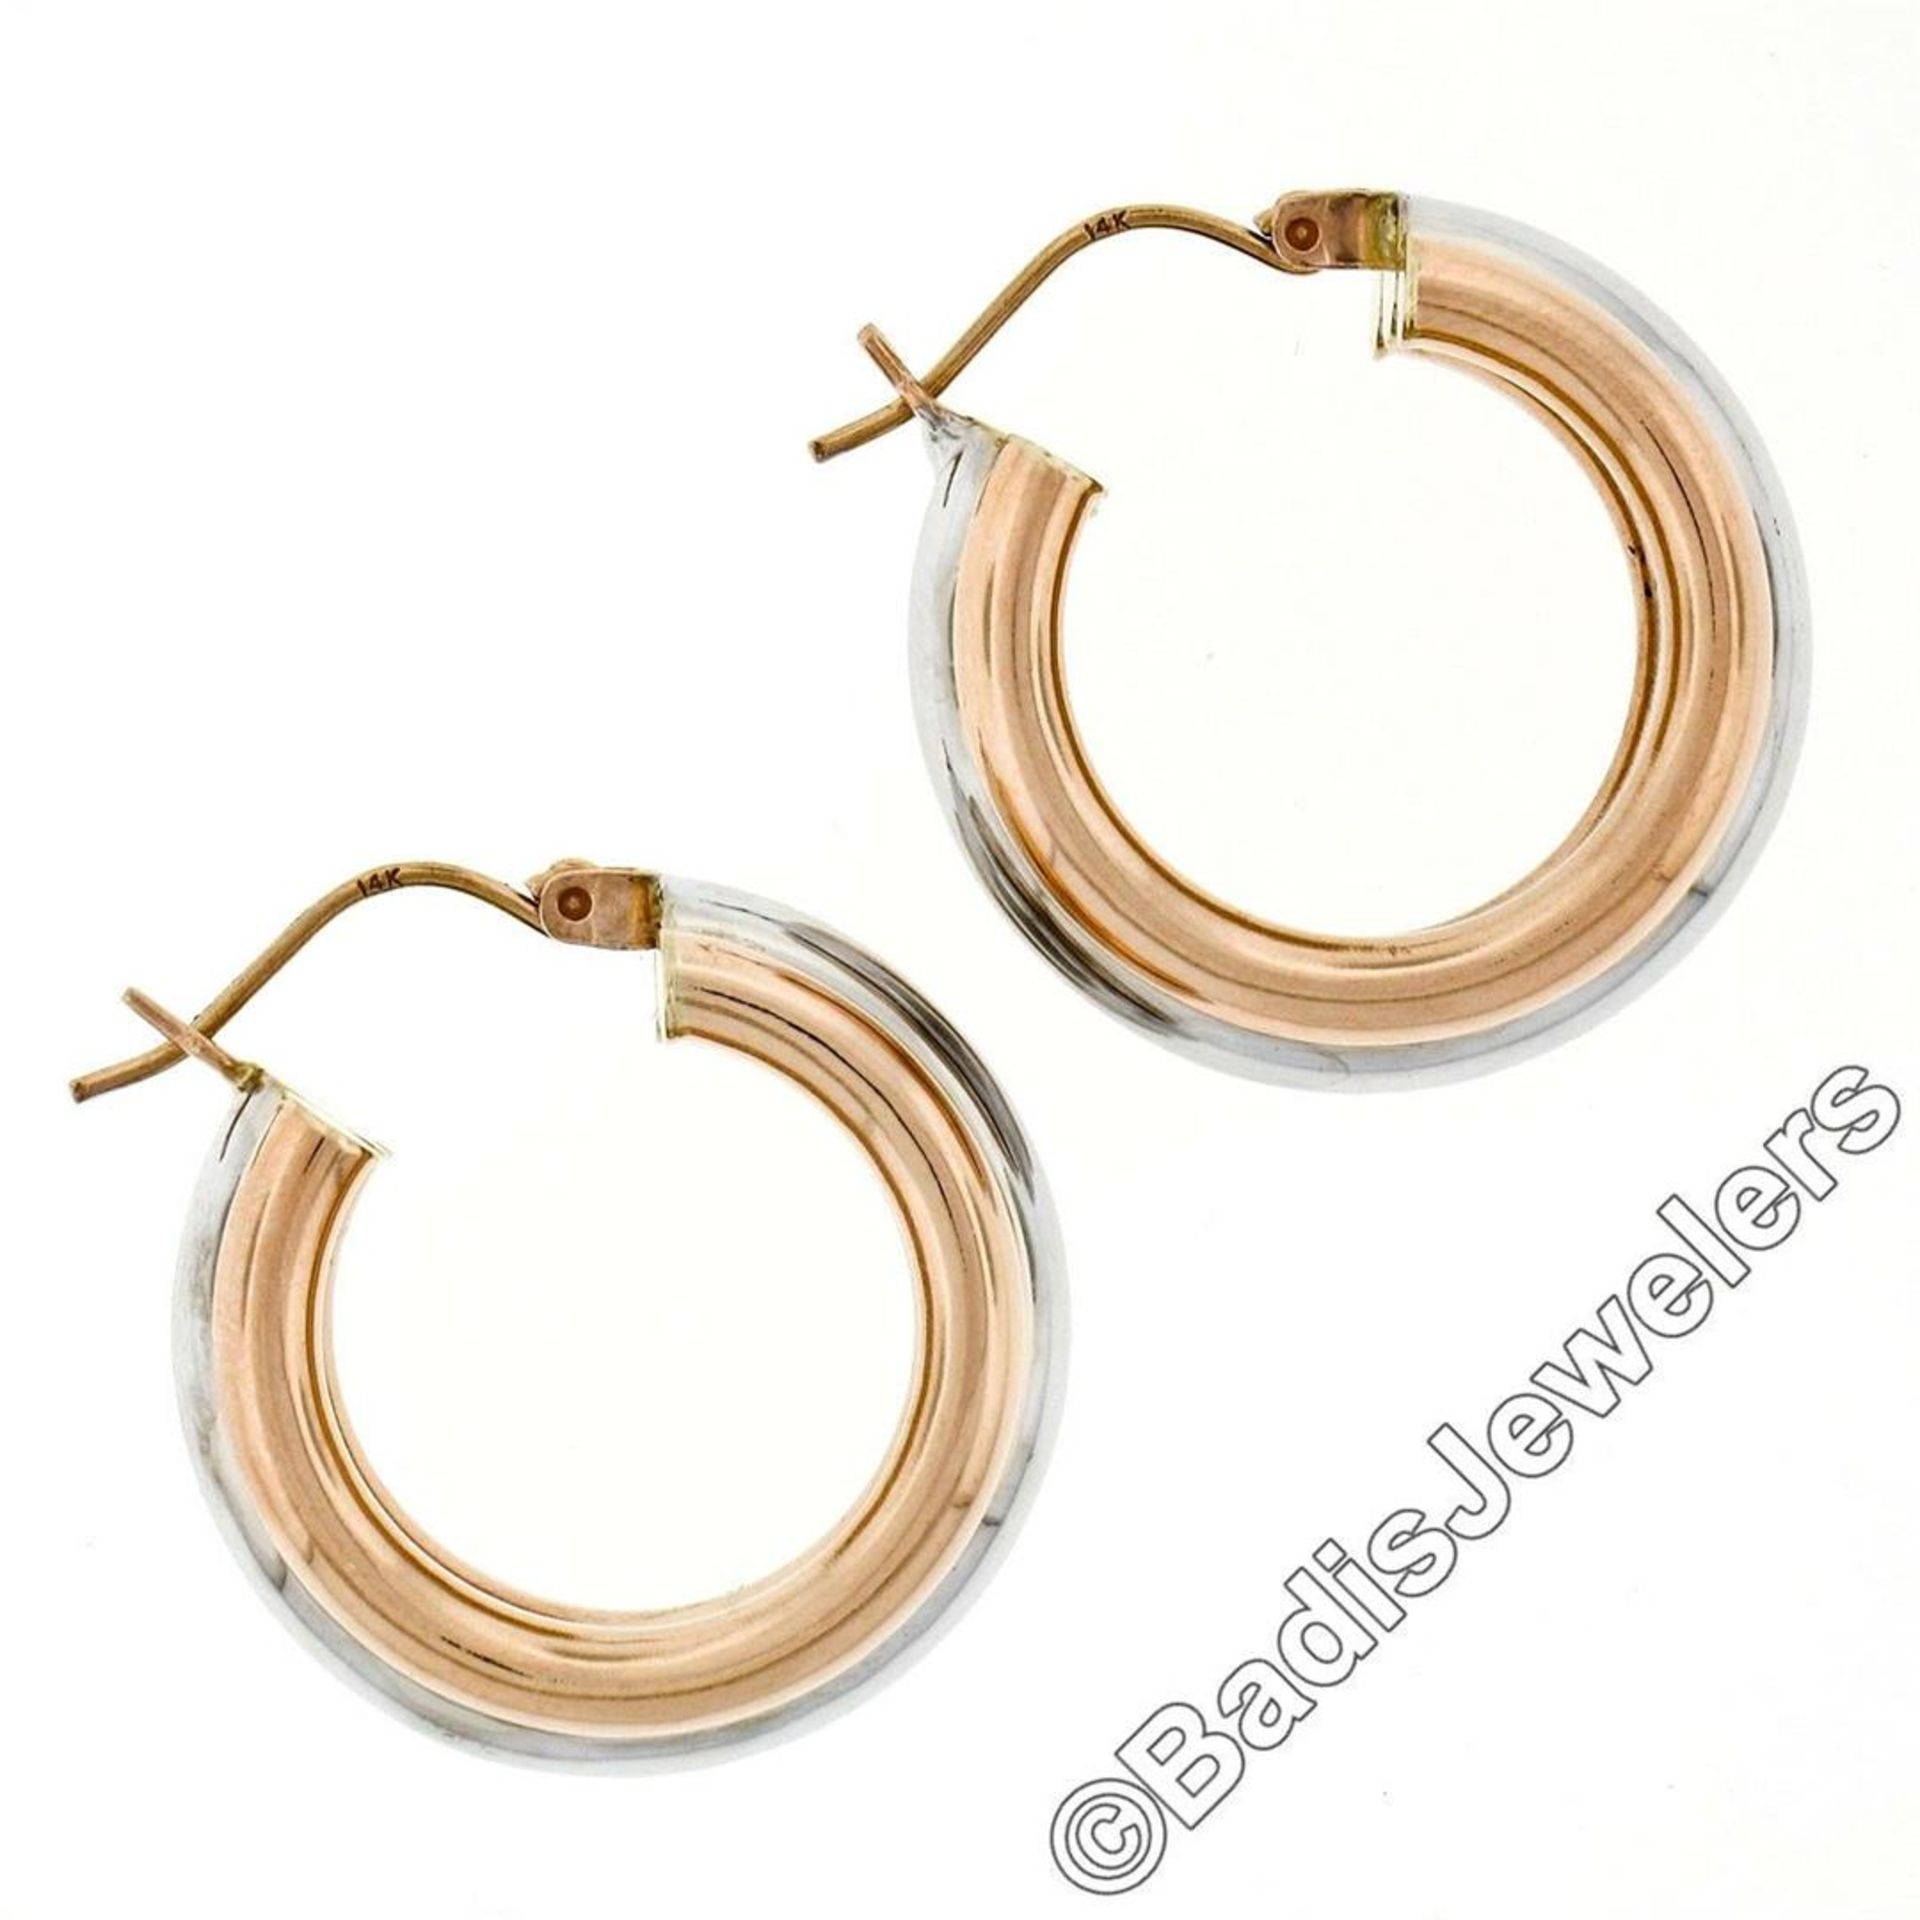 New 14kt Rose & White Gold Triple Puffed Tube Round Hoop Earrings - Image 5 of 5